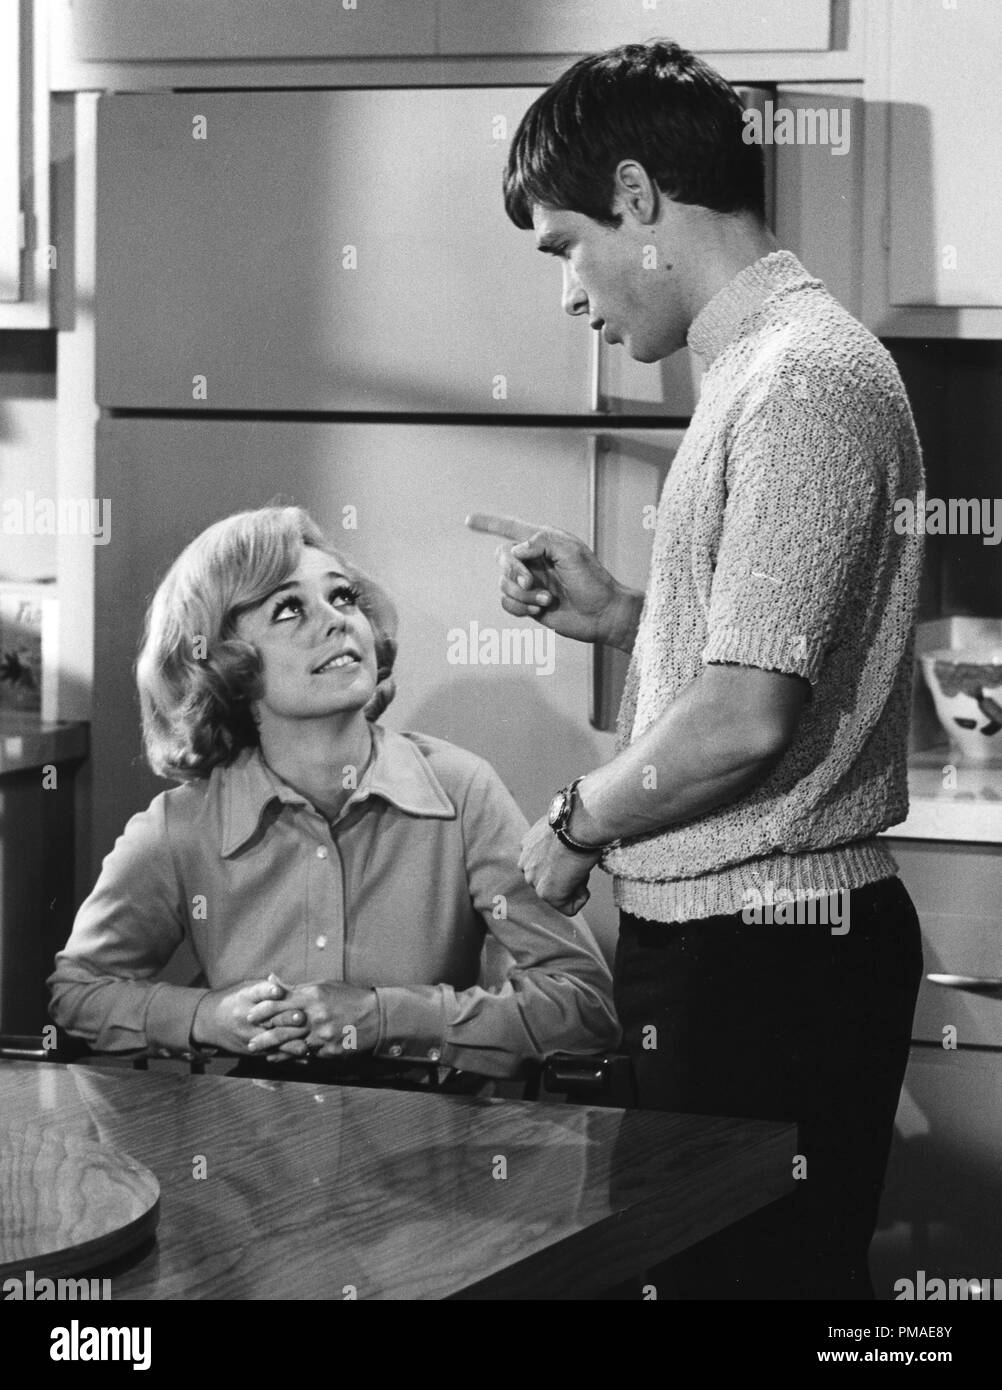 Press Photo Actress Tina Cole Actor Don Grady In My Three Sons My Xxx Hot Girl